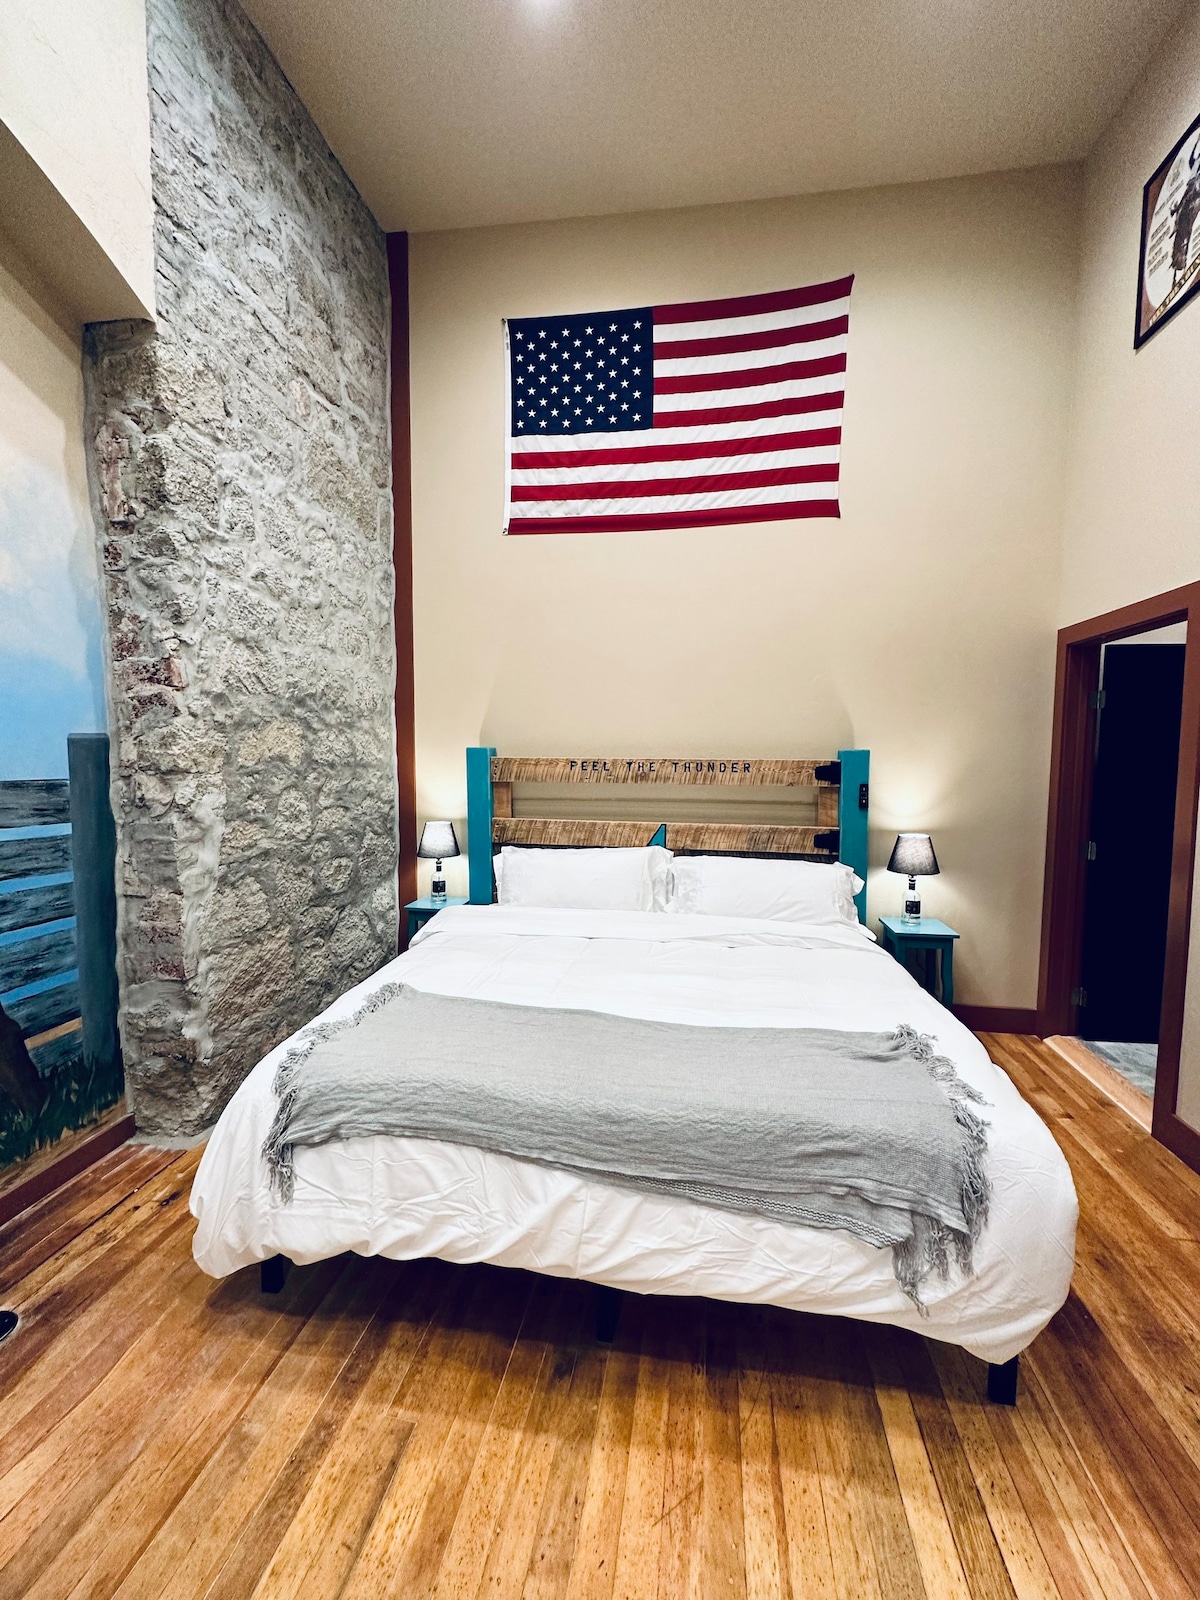 Rodeo themed unit - Historic Litch Hotel